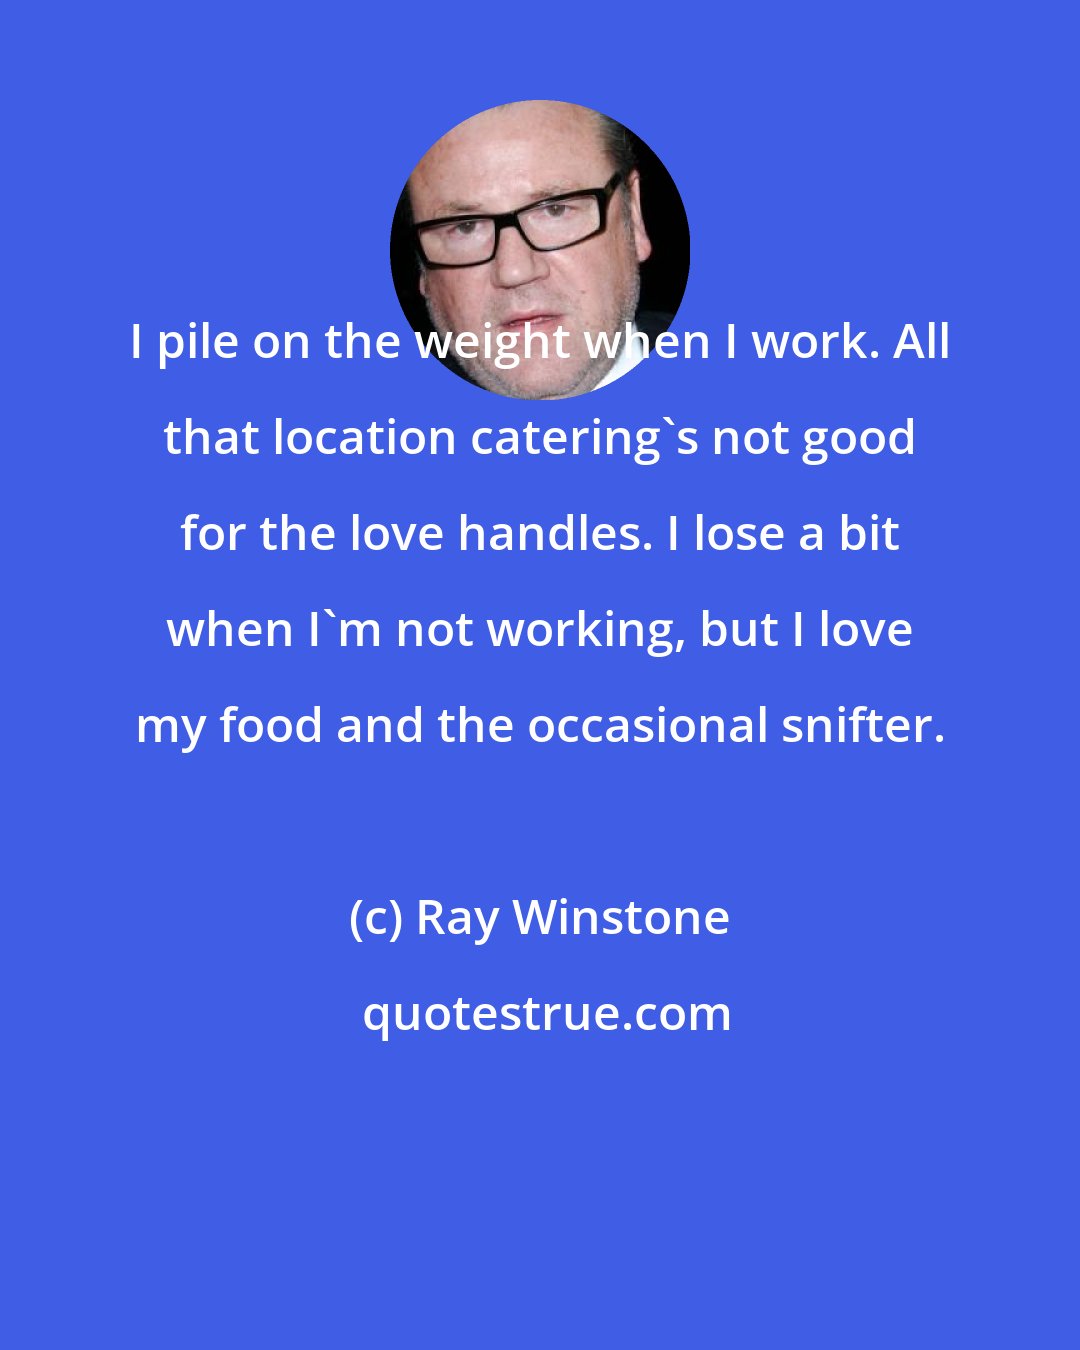 Ray Winstone: I pile on the weight when I work. All that location catering's not good for the love handles. I lose a bit when I'm not working, but I love my food and the occasional snifter.